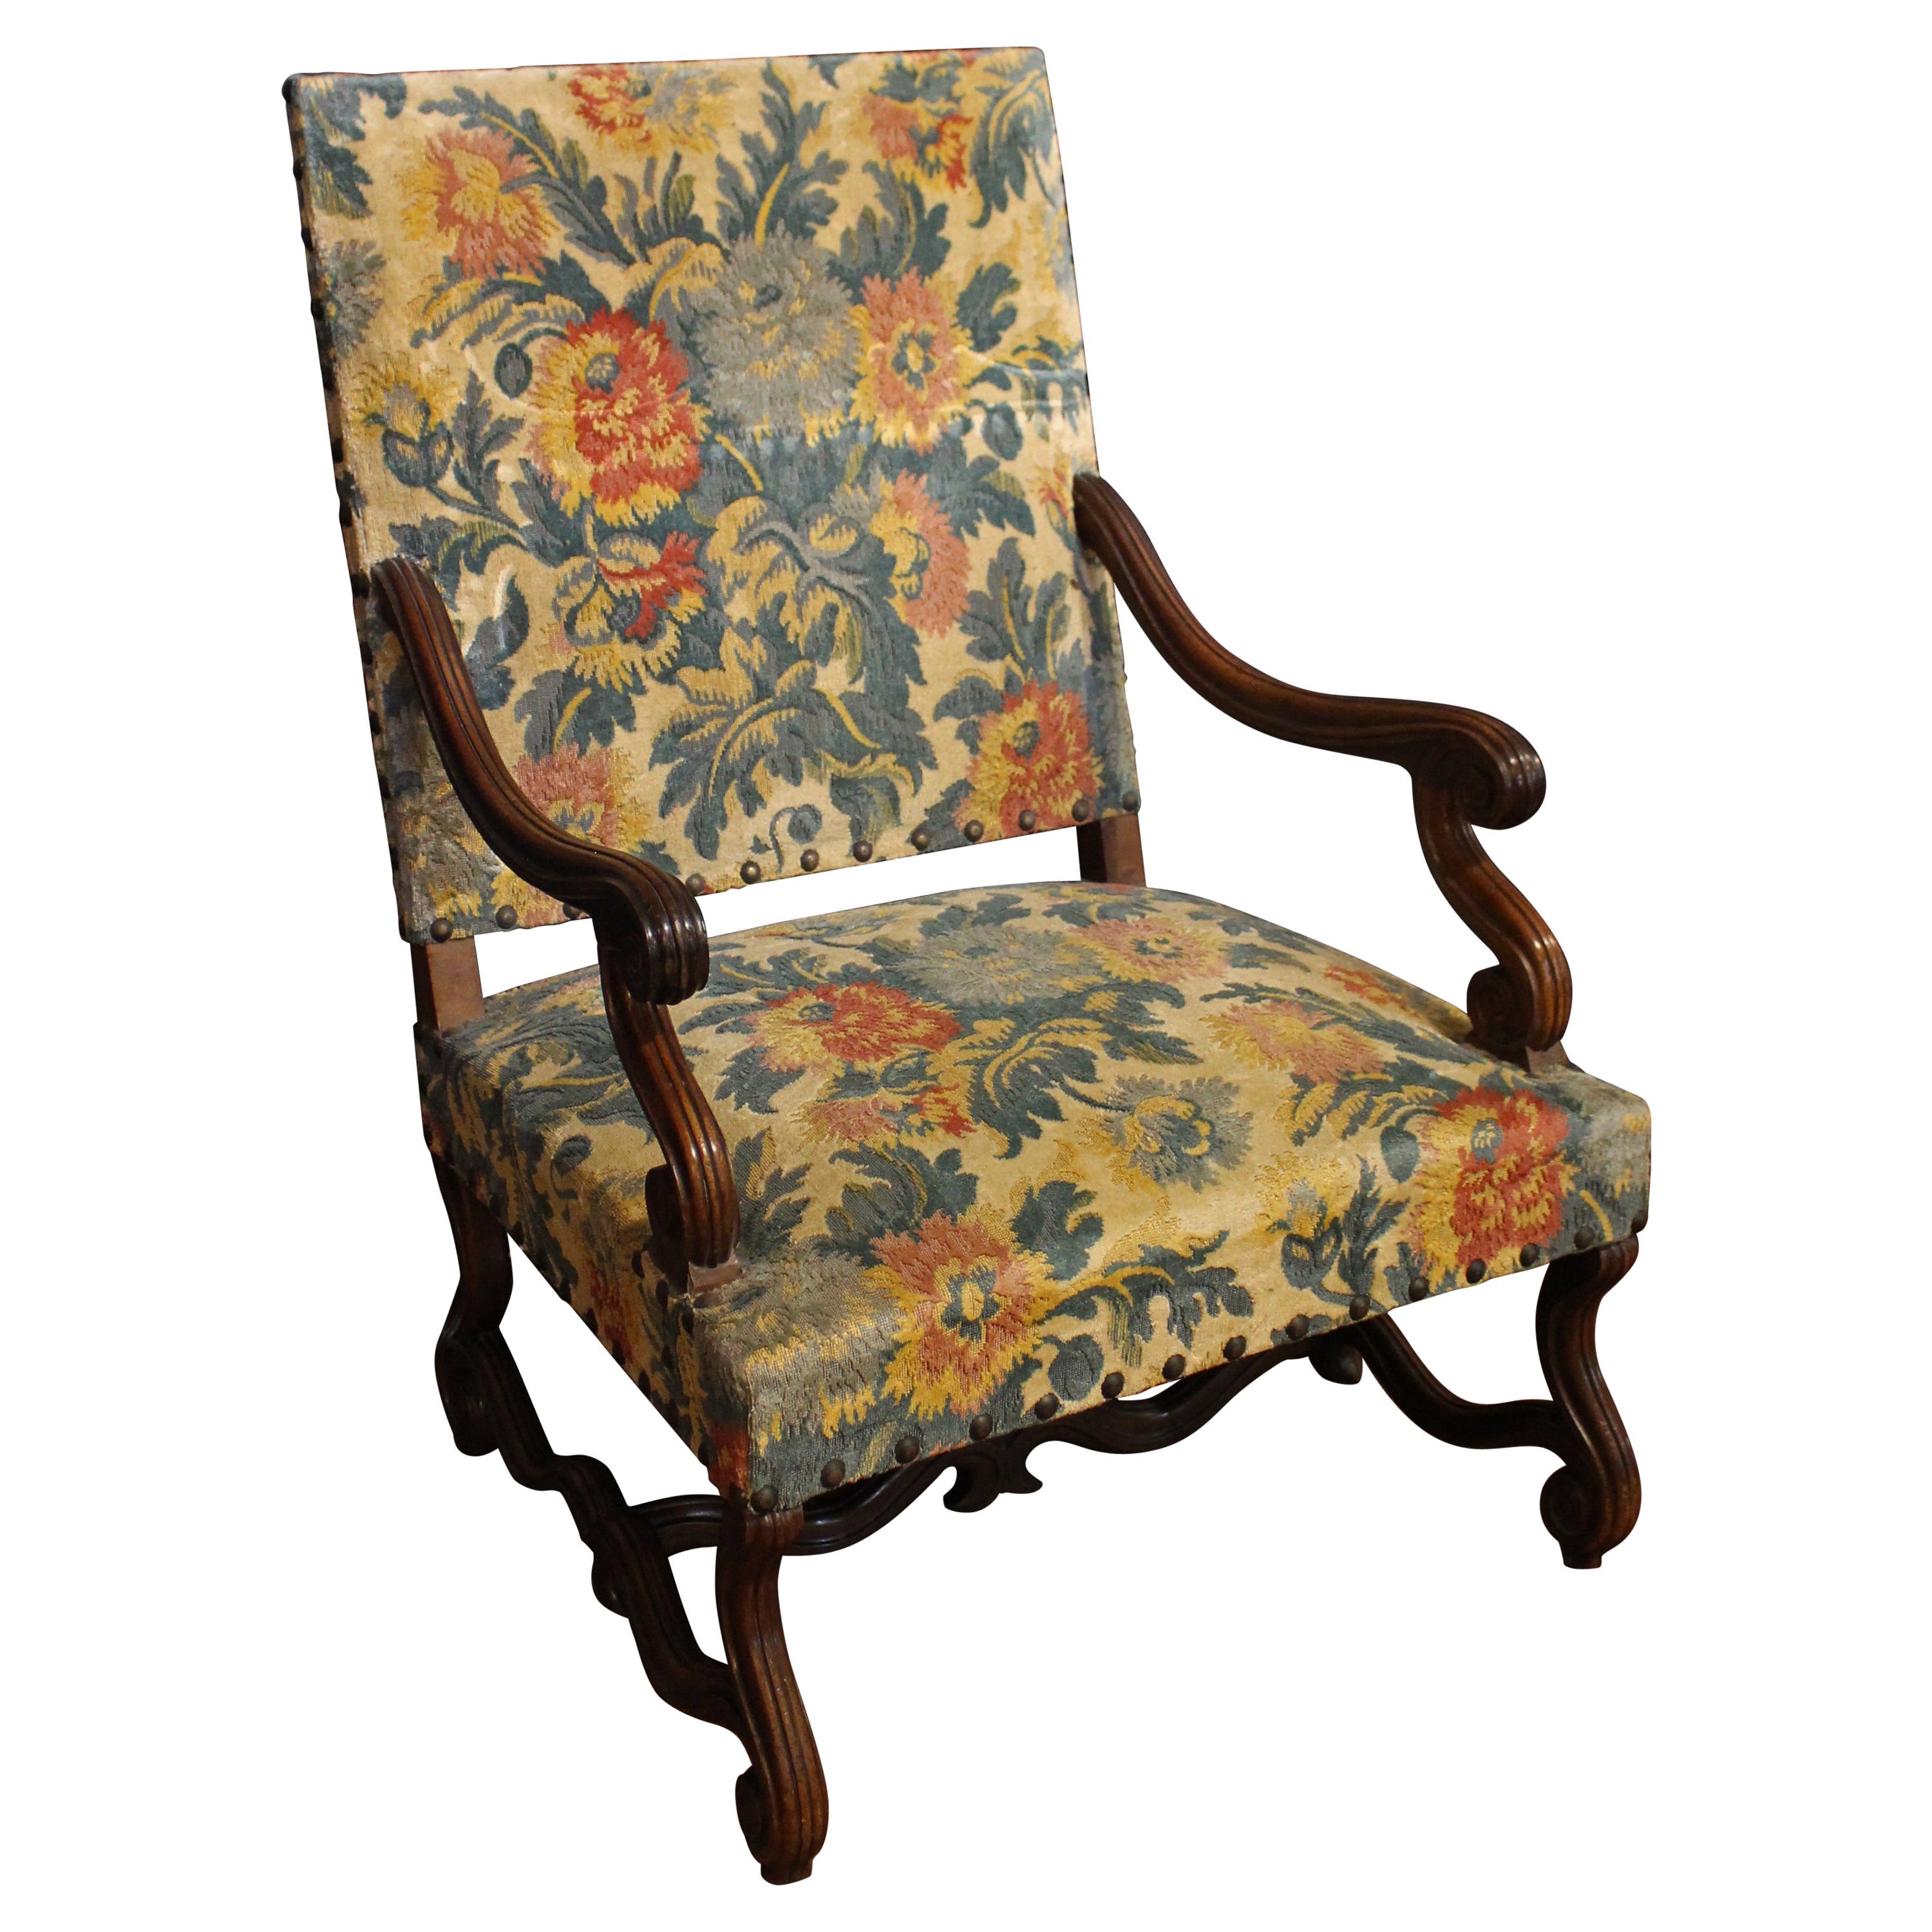 Circa 1870 French Grand Scale Regence Style Fauteuil For Sale